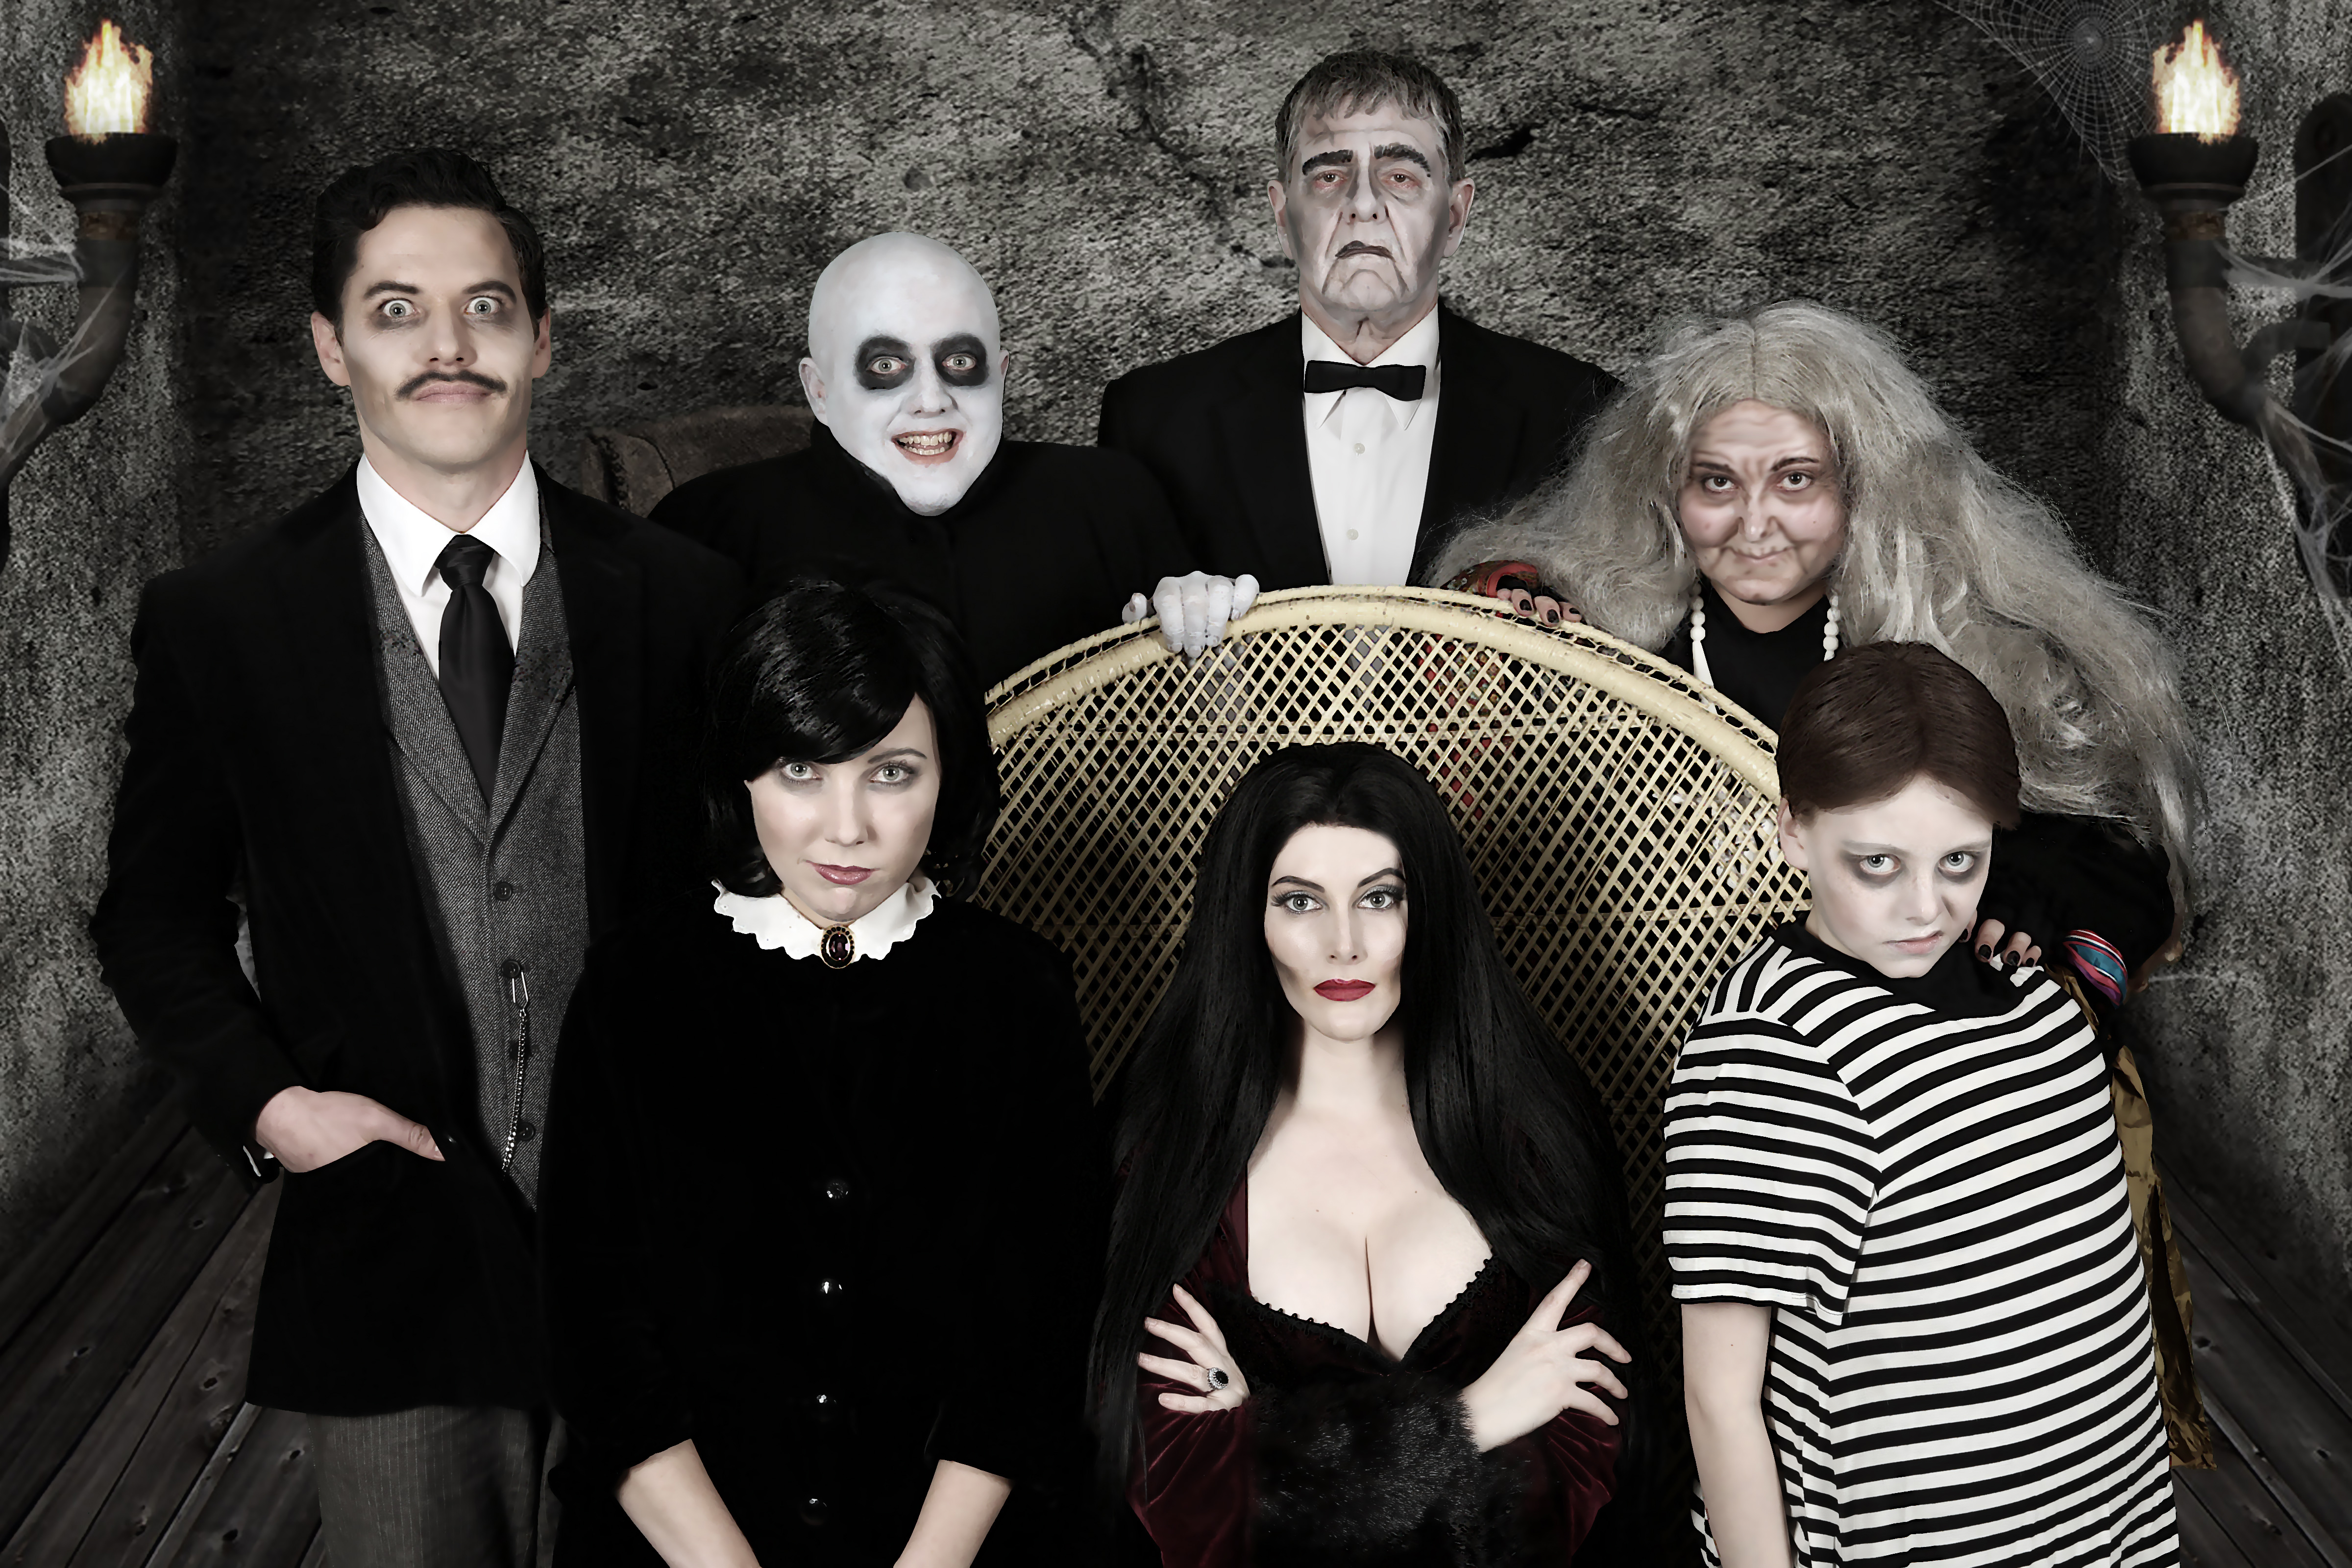 Centre Stage Gets Spooky and Kooky with 'The Addams Family'